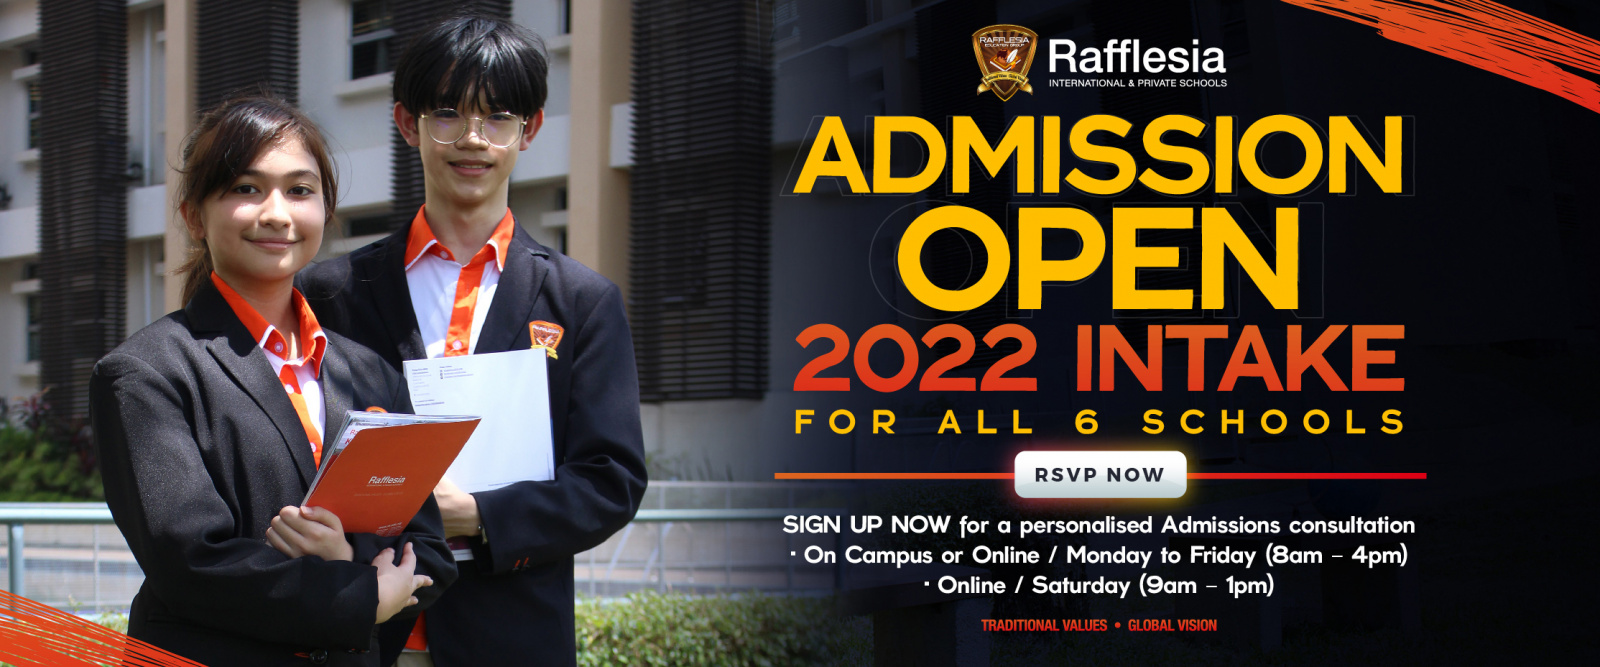 Admission Open 2022 Intake